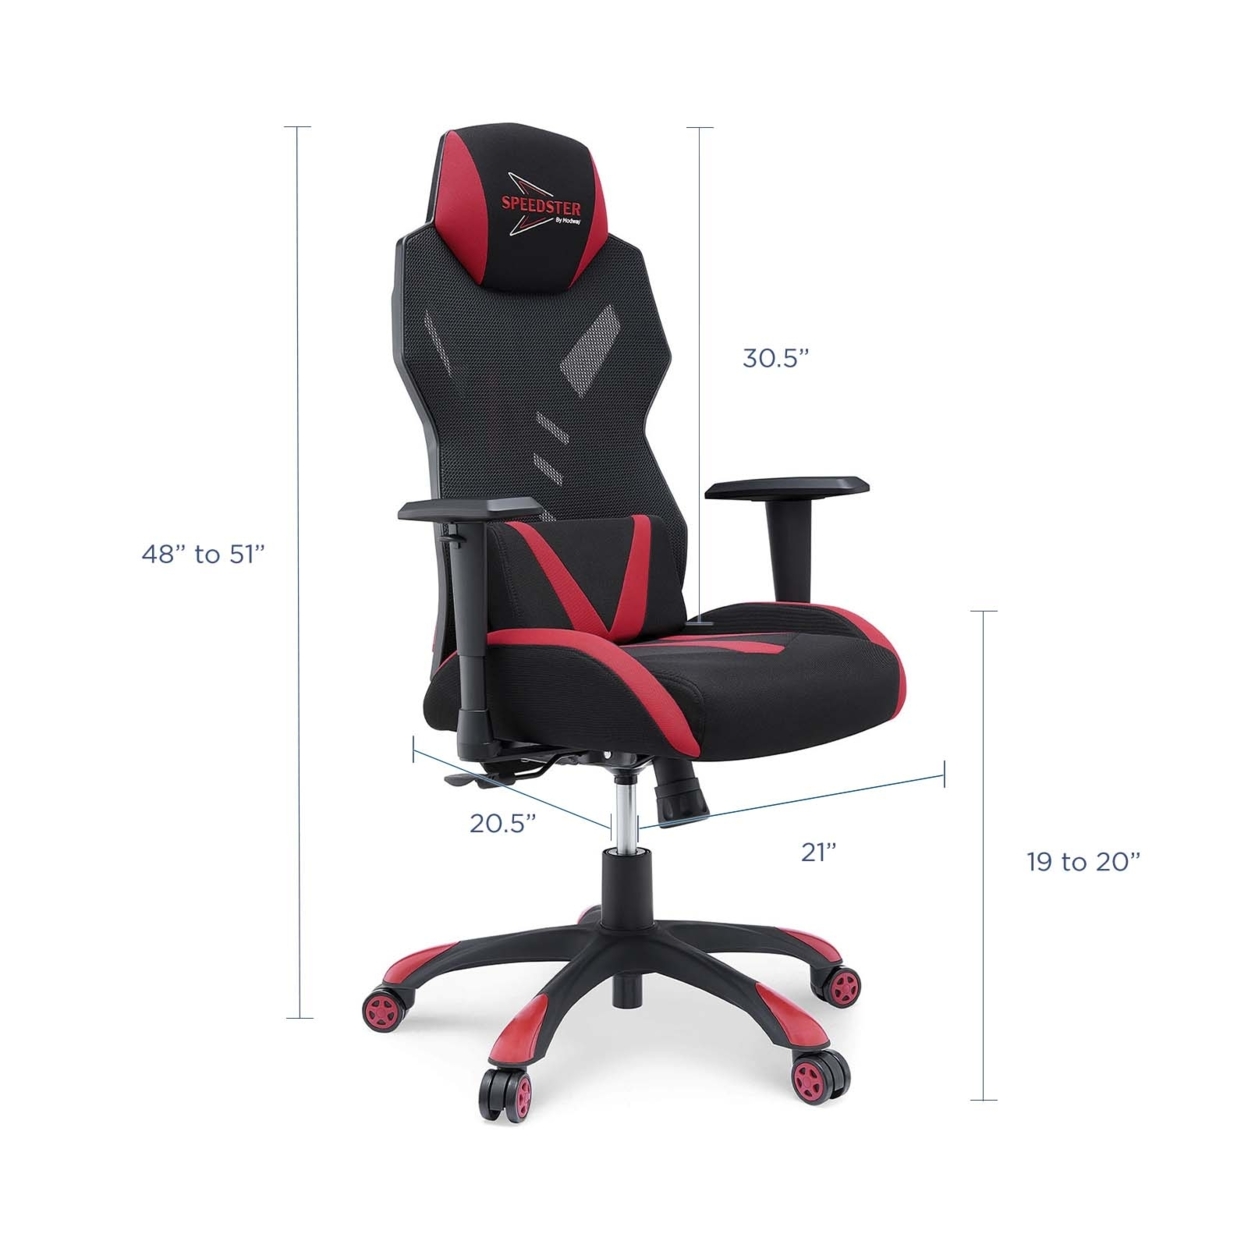 Modway Speedster Modern Mesh Fabric Gaming Computer Chair in Black/Red - image 4 of 8